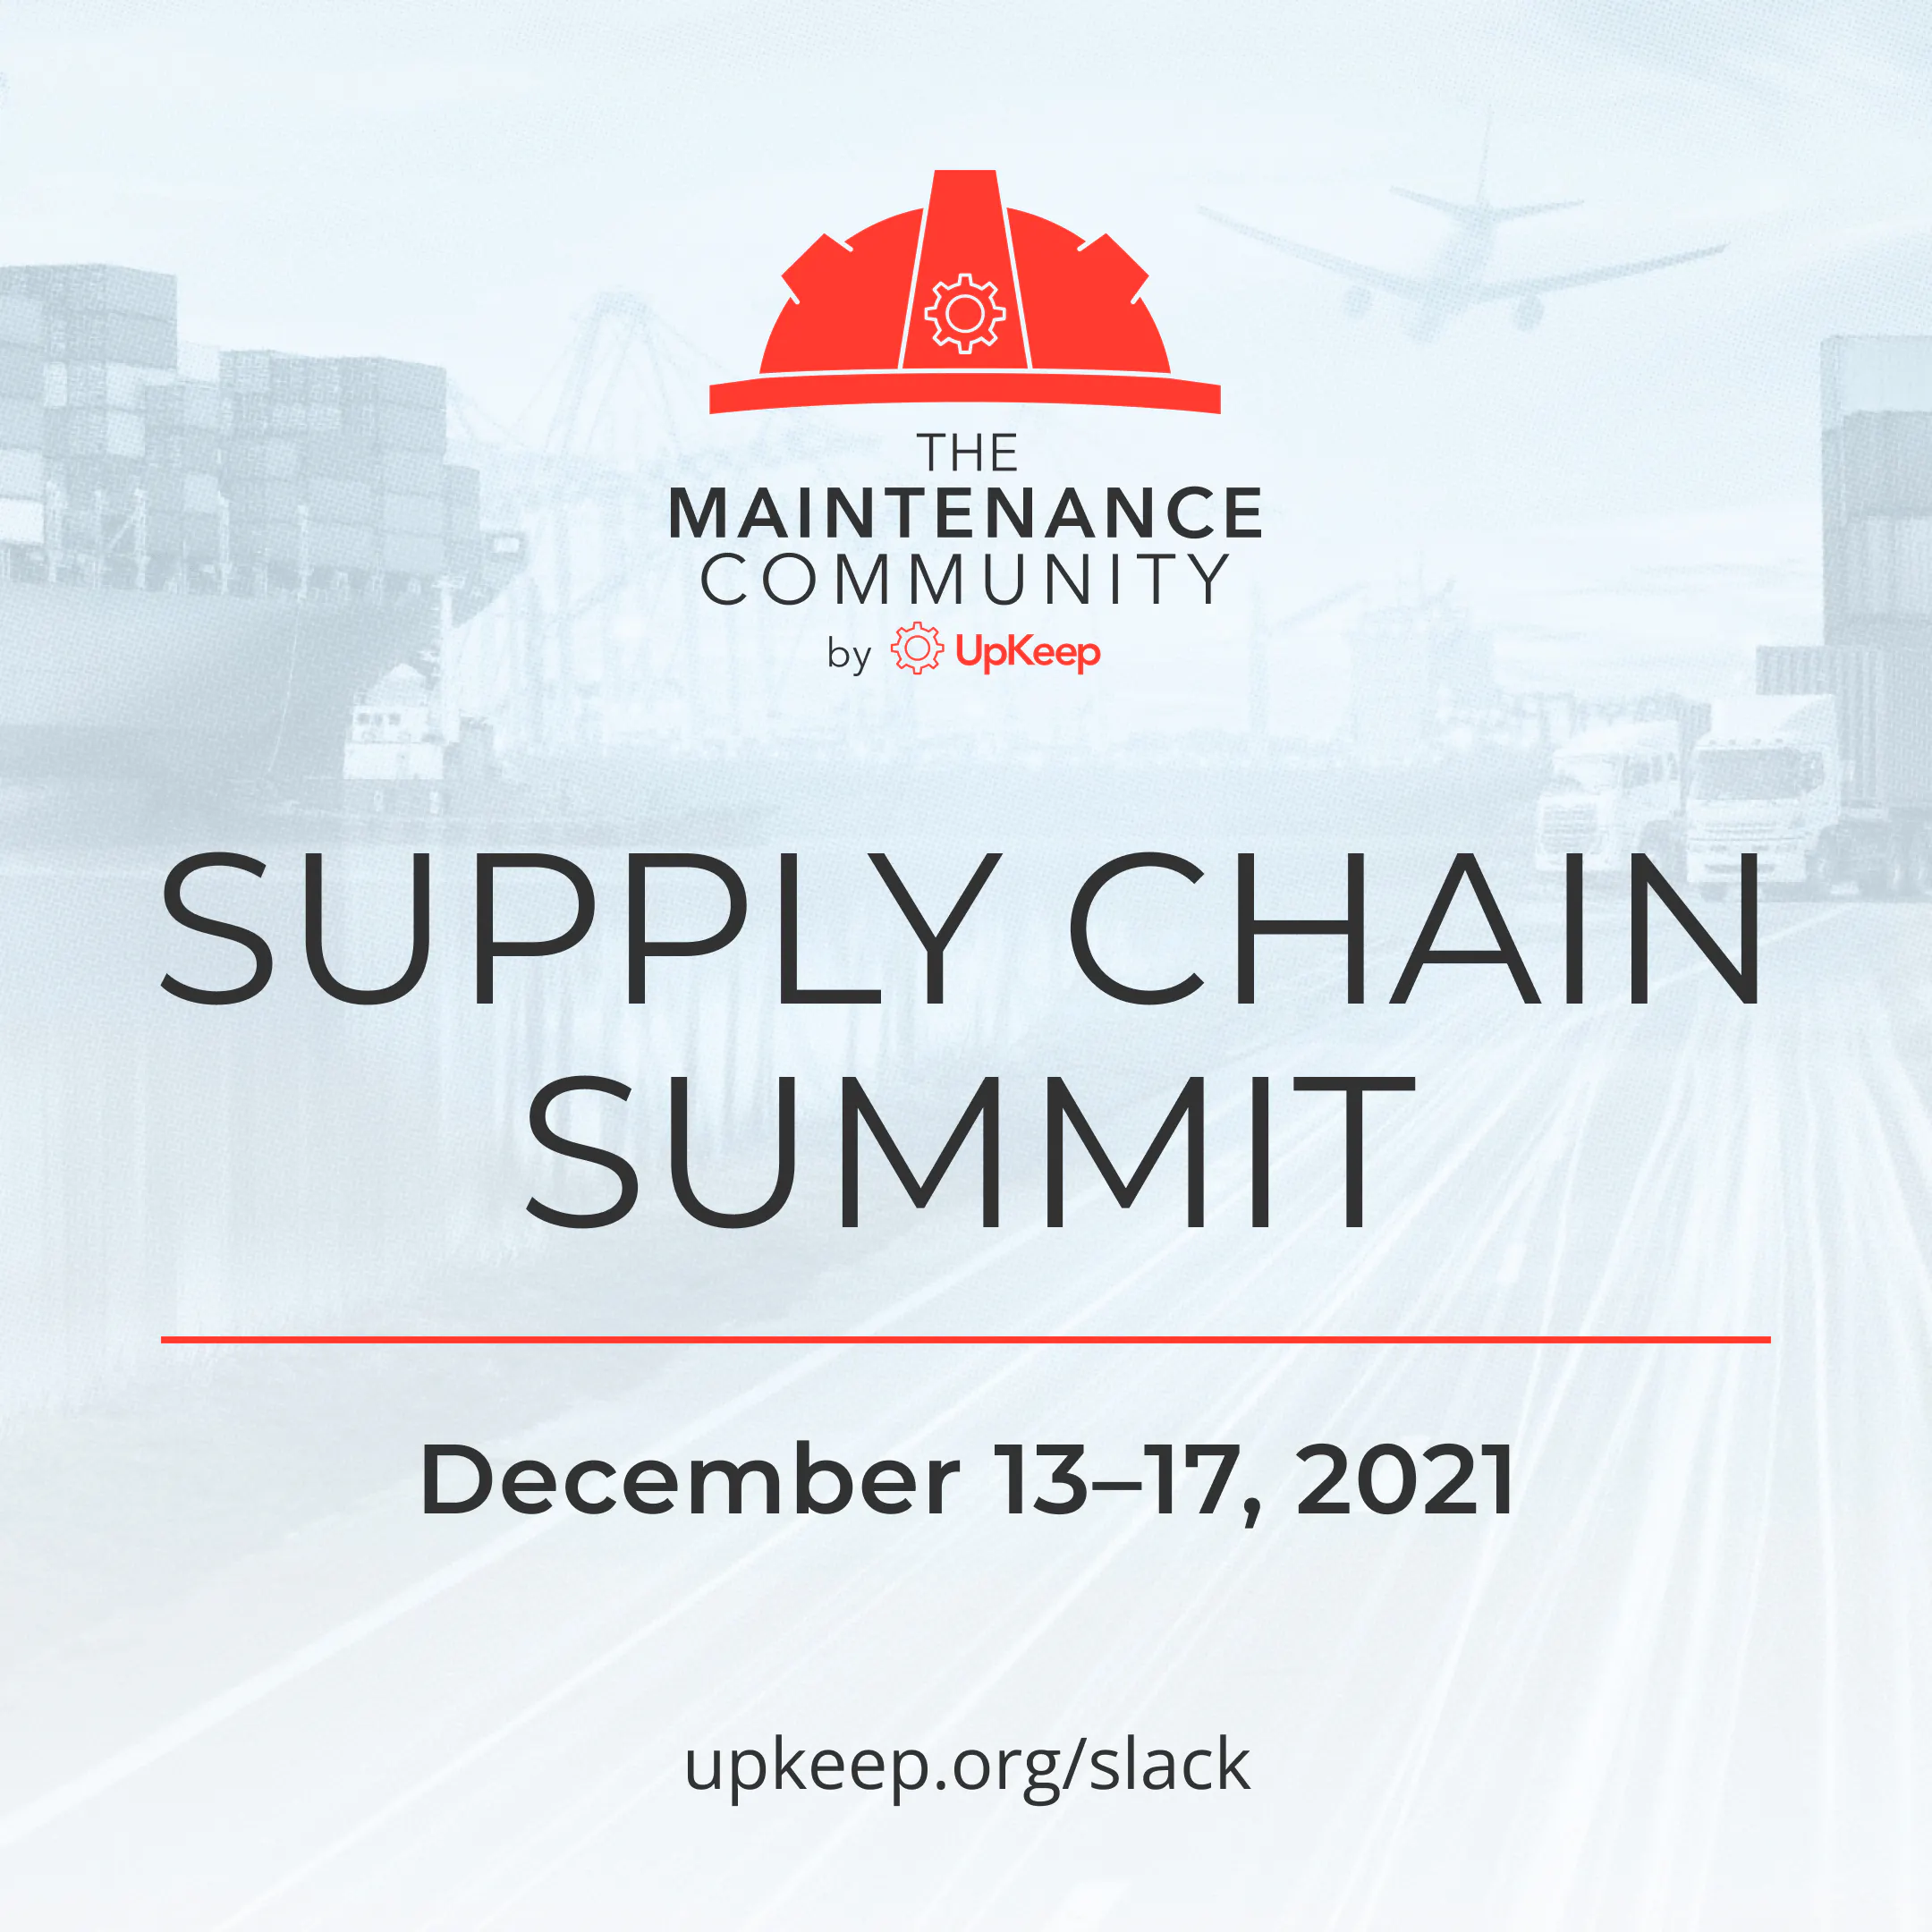 Announcing The Maintenance Community Supply Chain Summit 2021